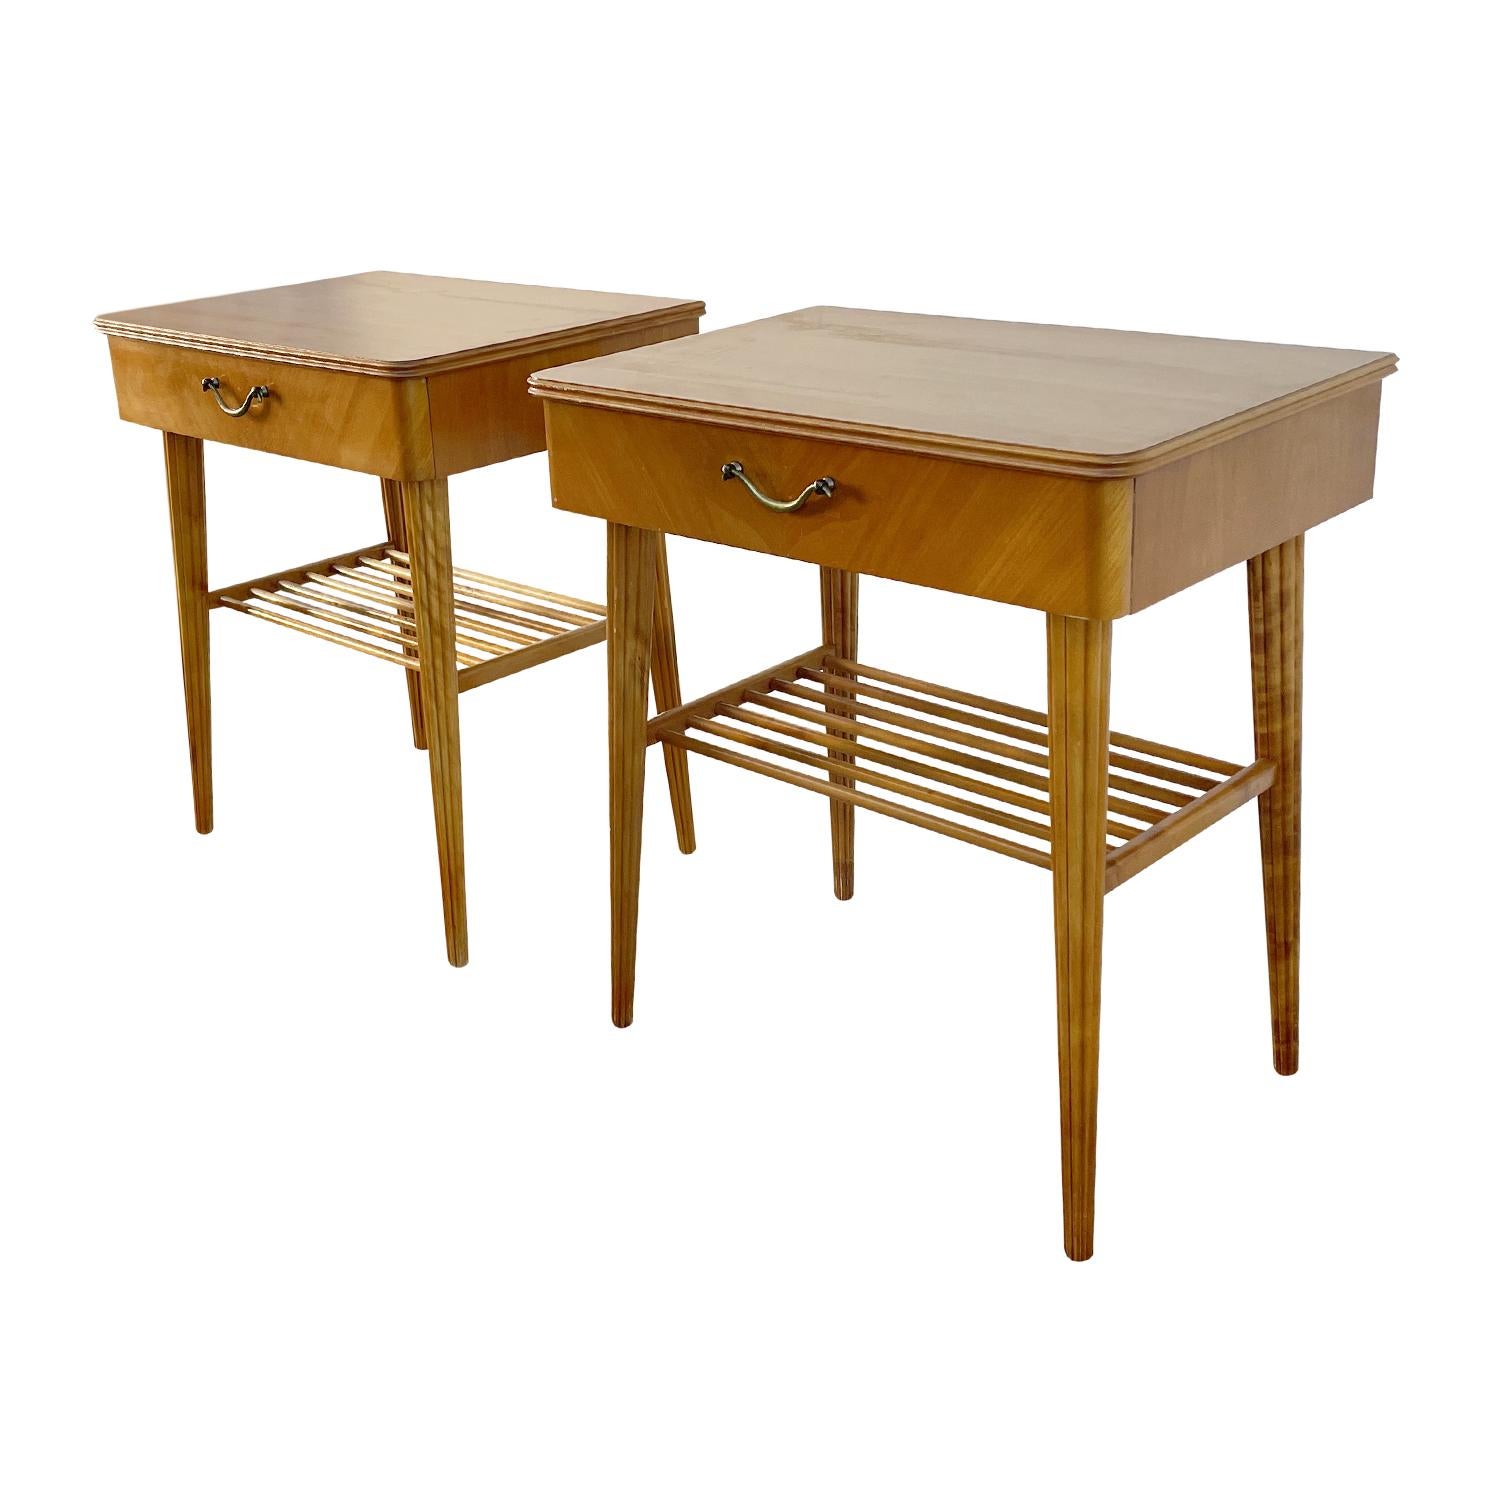 20th Century Danish Pair of Birchwood Nightstands - Vintage Brass Bedside Tables For Sale 3